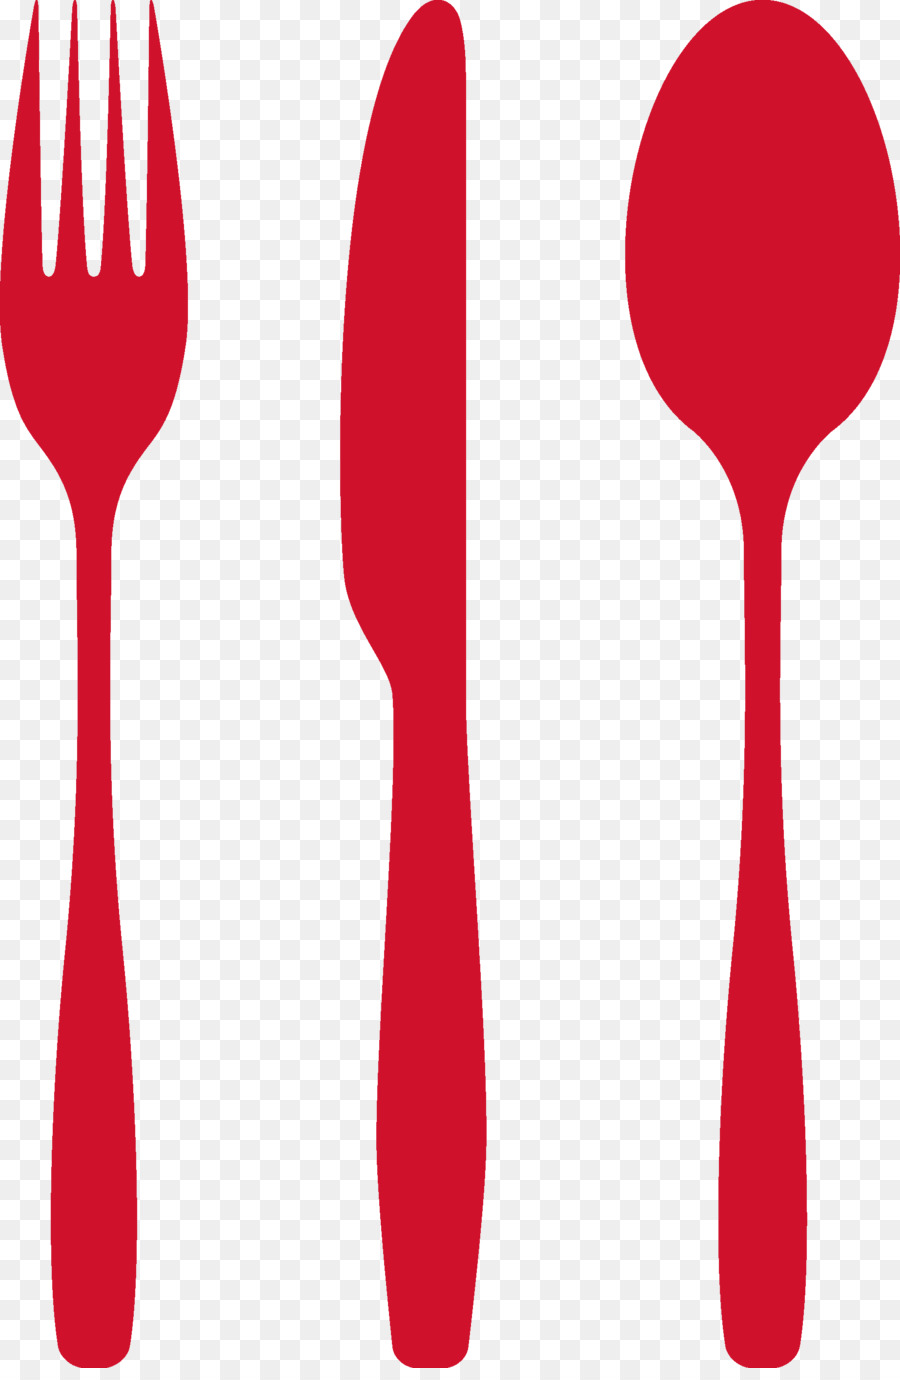 Spoon Fork png download